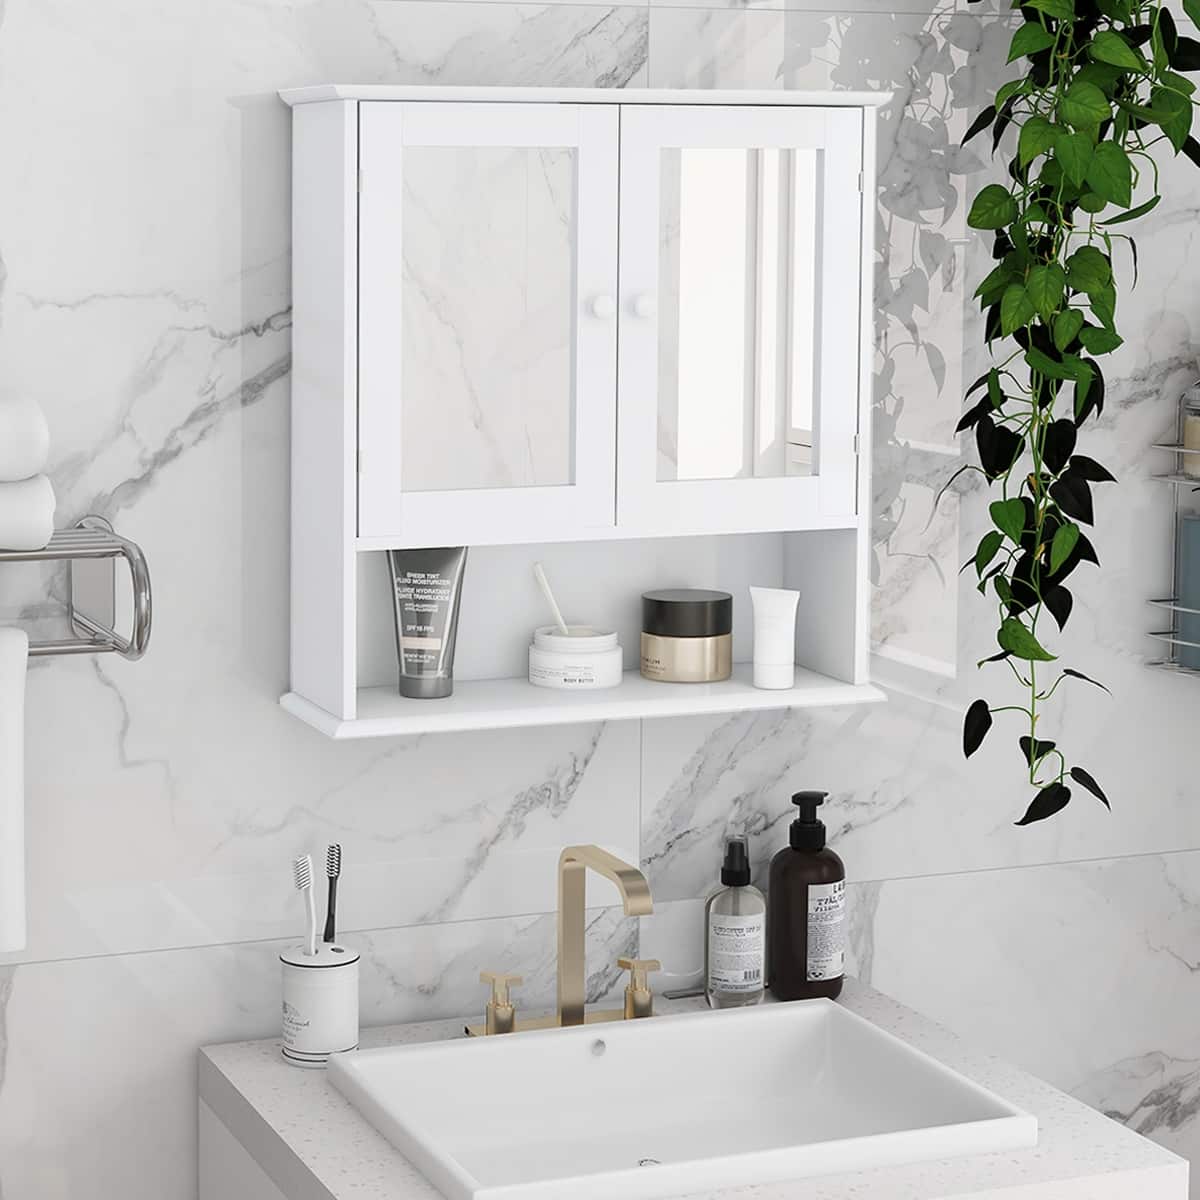 Bathroom Wall Cabinet with Doule Mirror Doors and Shelvs - On Sale ...